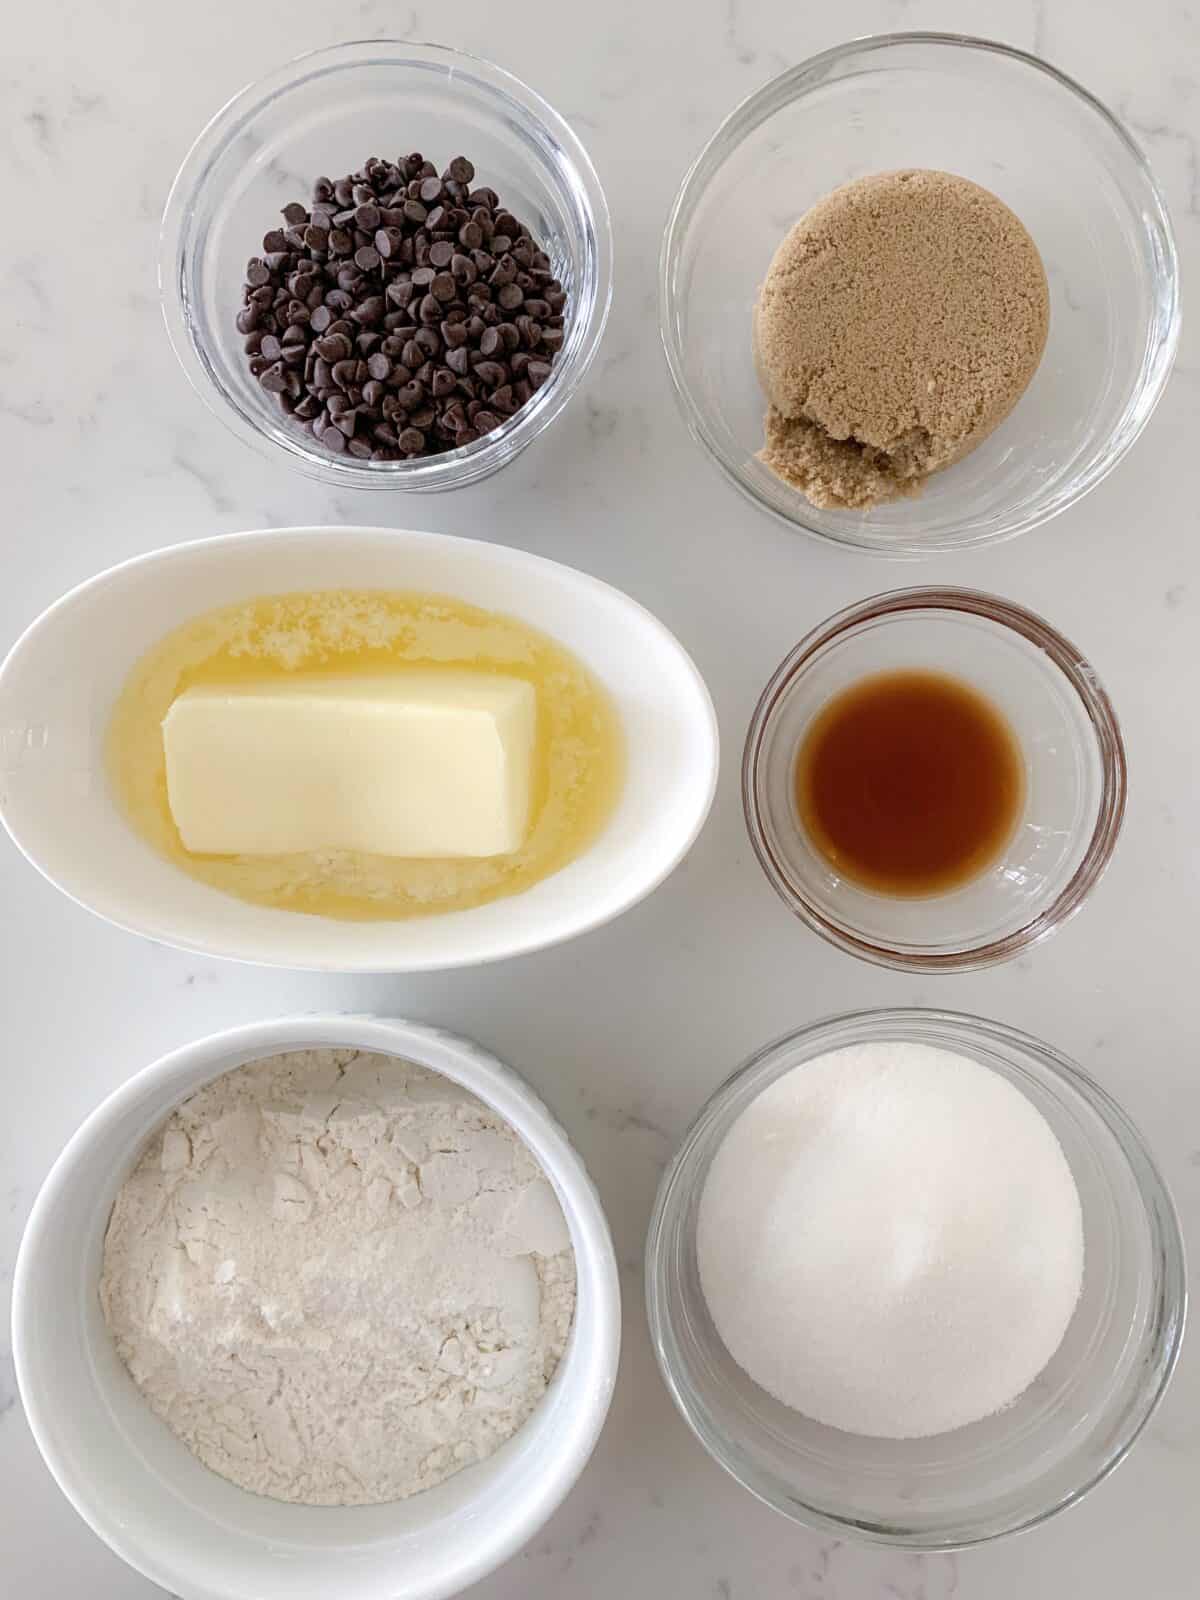 edible cookie dough ingredients on counter